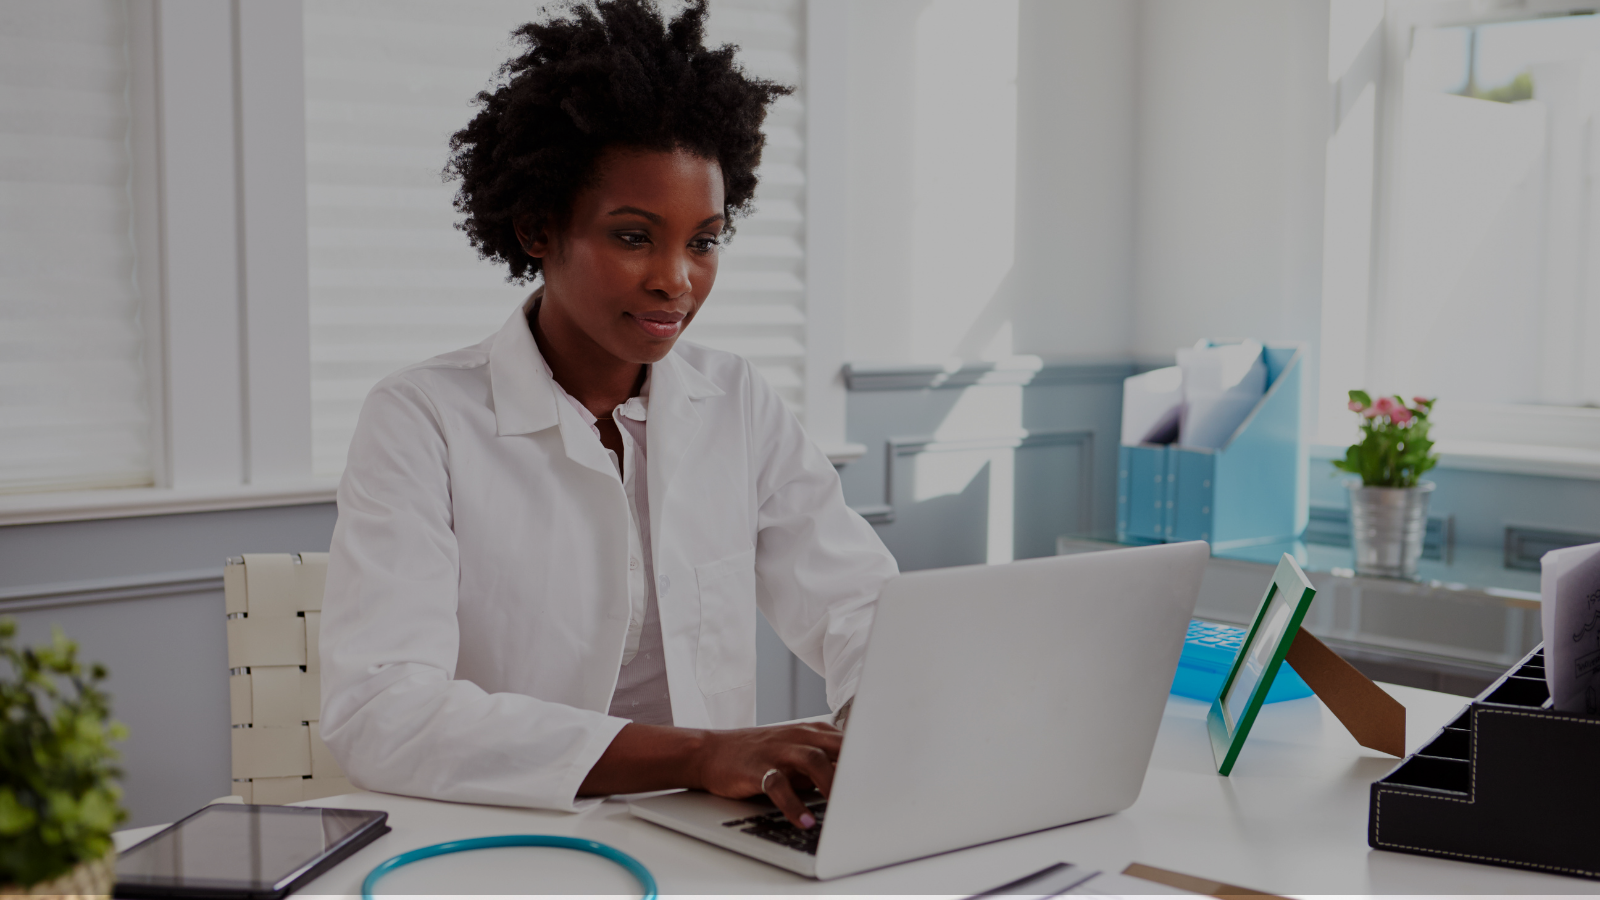 Image of female Black doctor on her computer